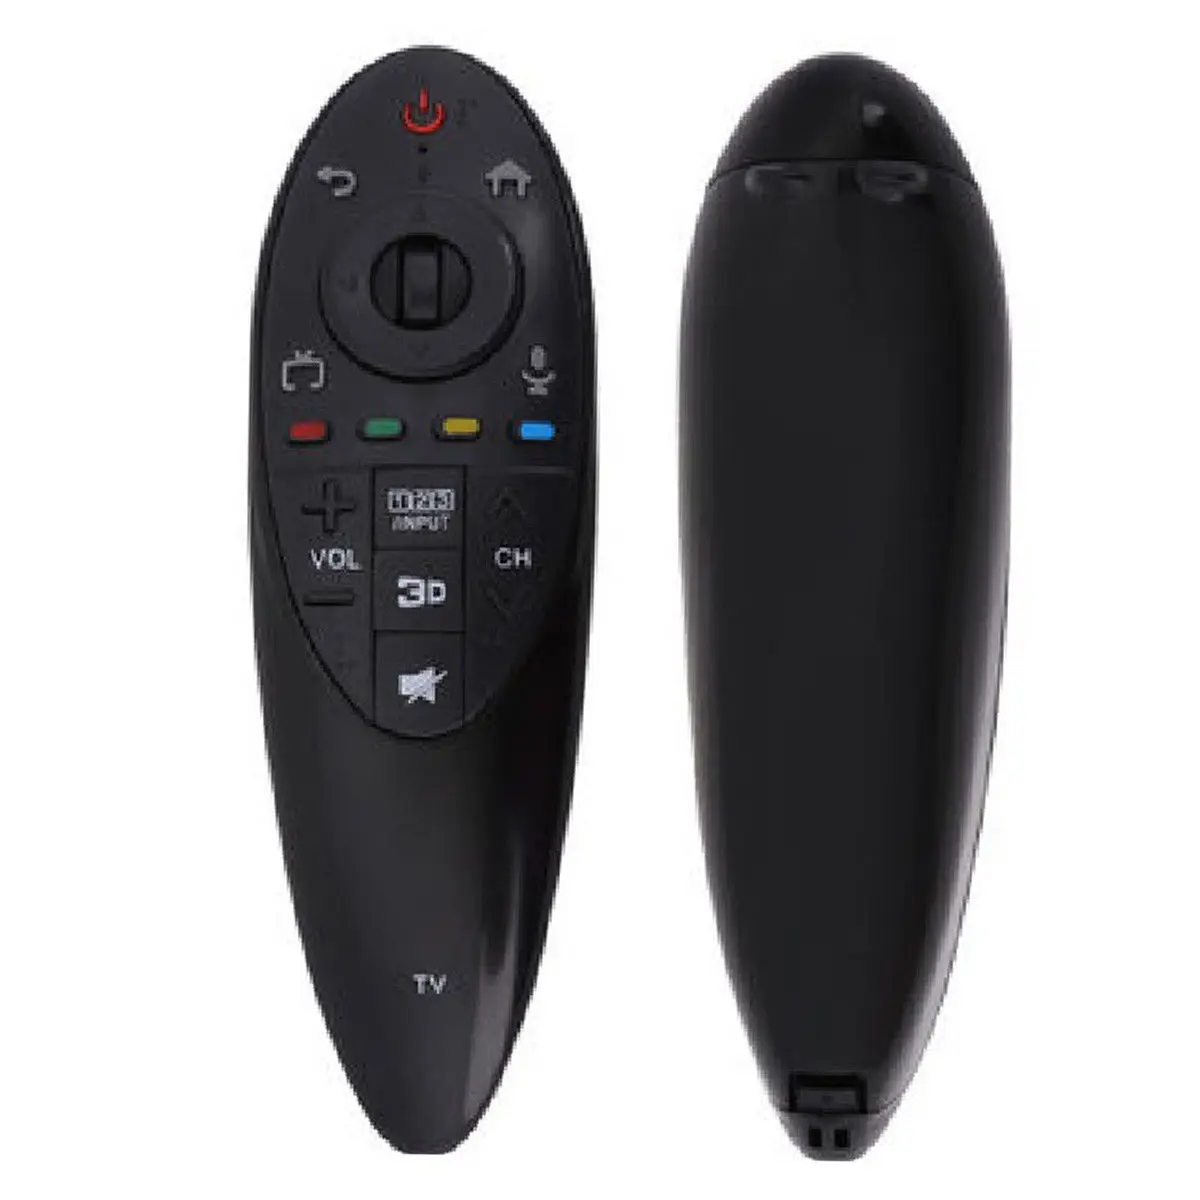 New For LG TV 3D Magic Remote Control LCD Smart TV AN-MR500 AN-MR500G AN-MR500 TV Remote